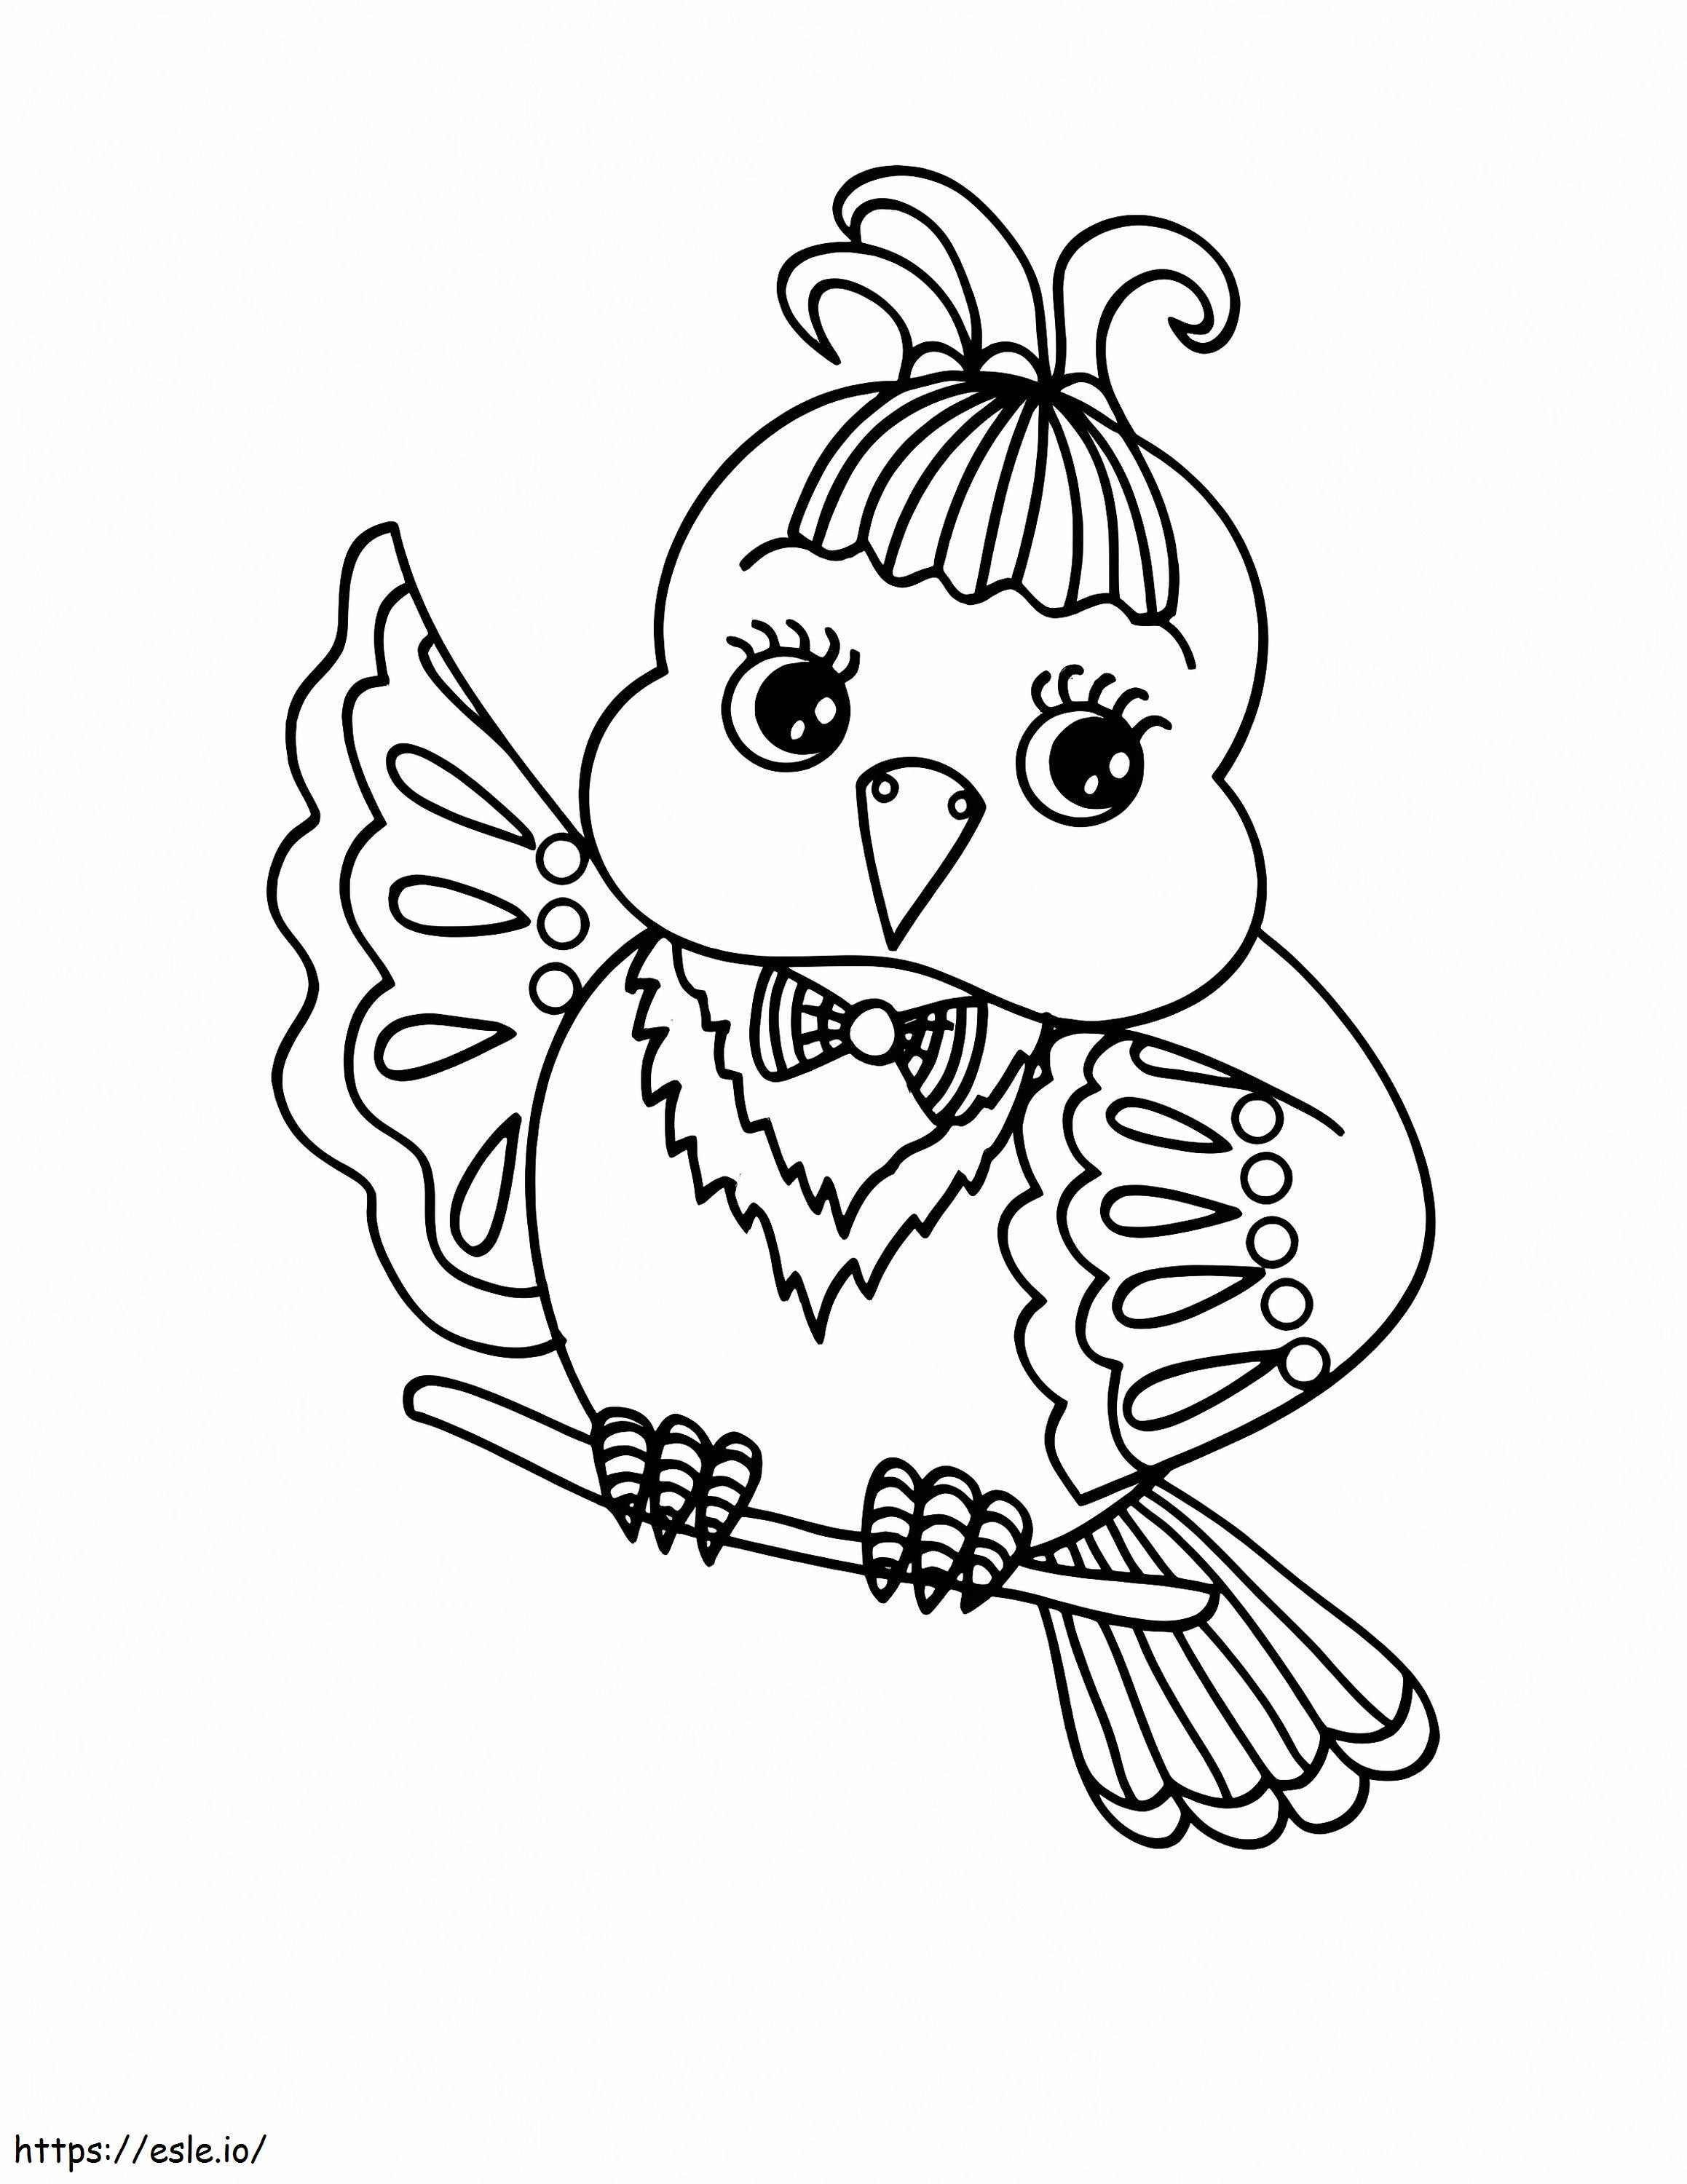 Cute Canary Bird coloring page